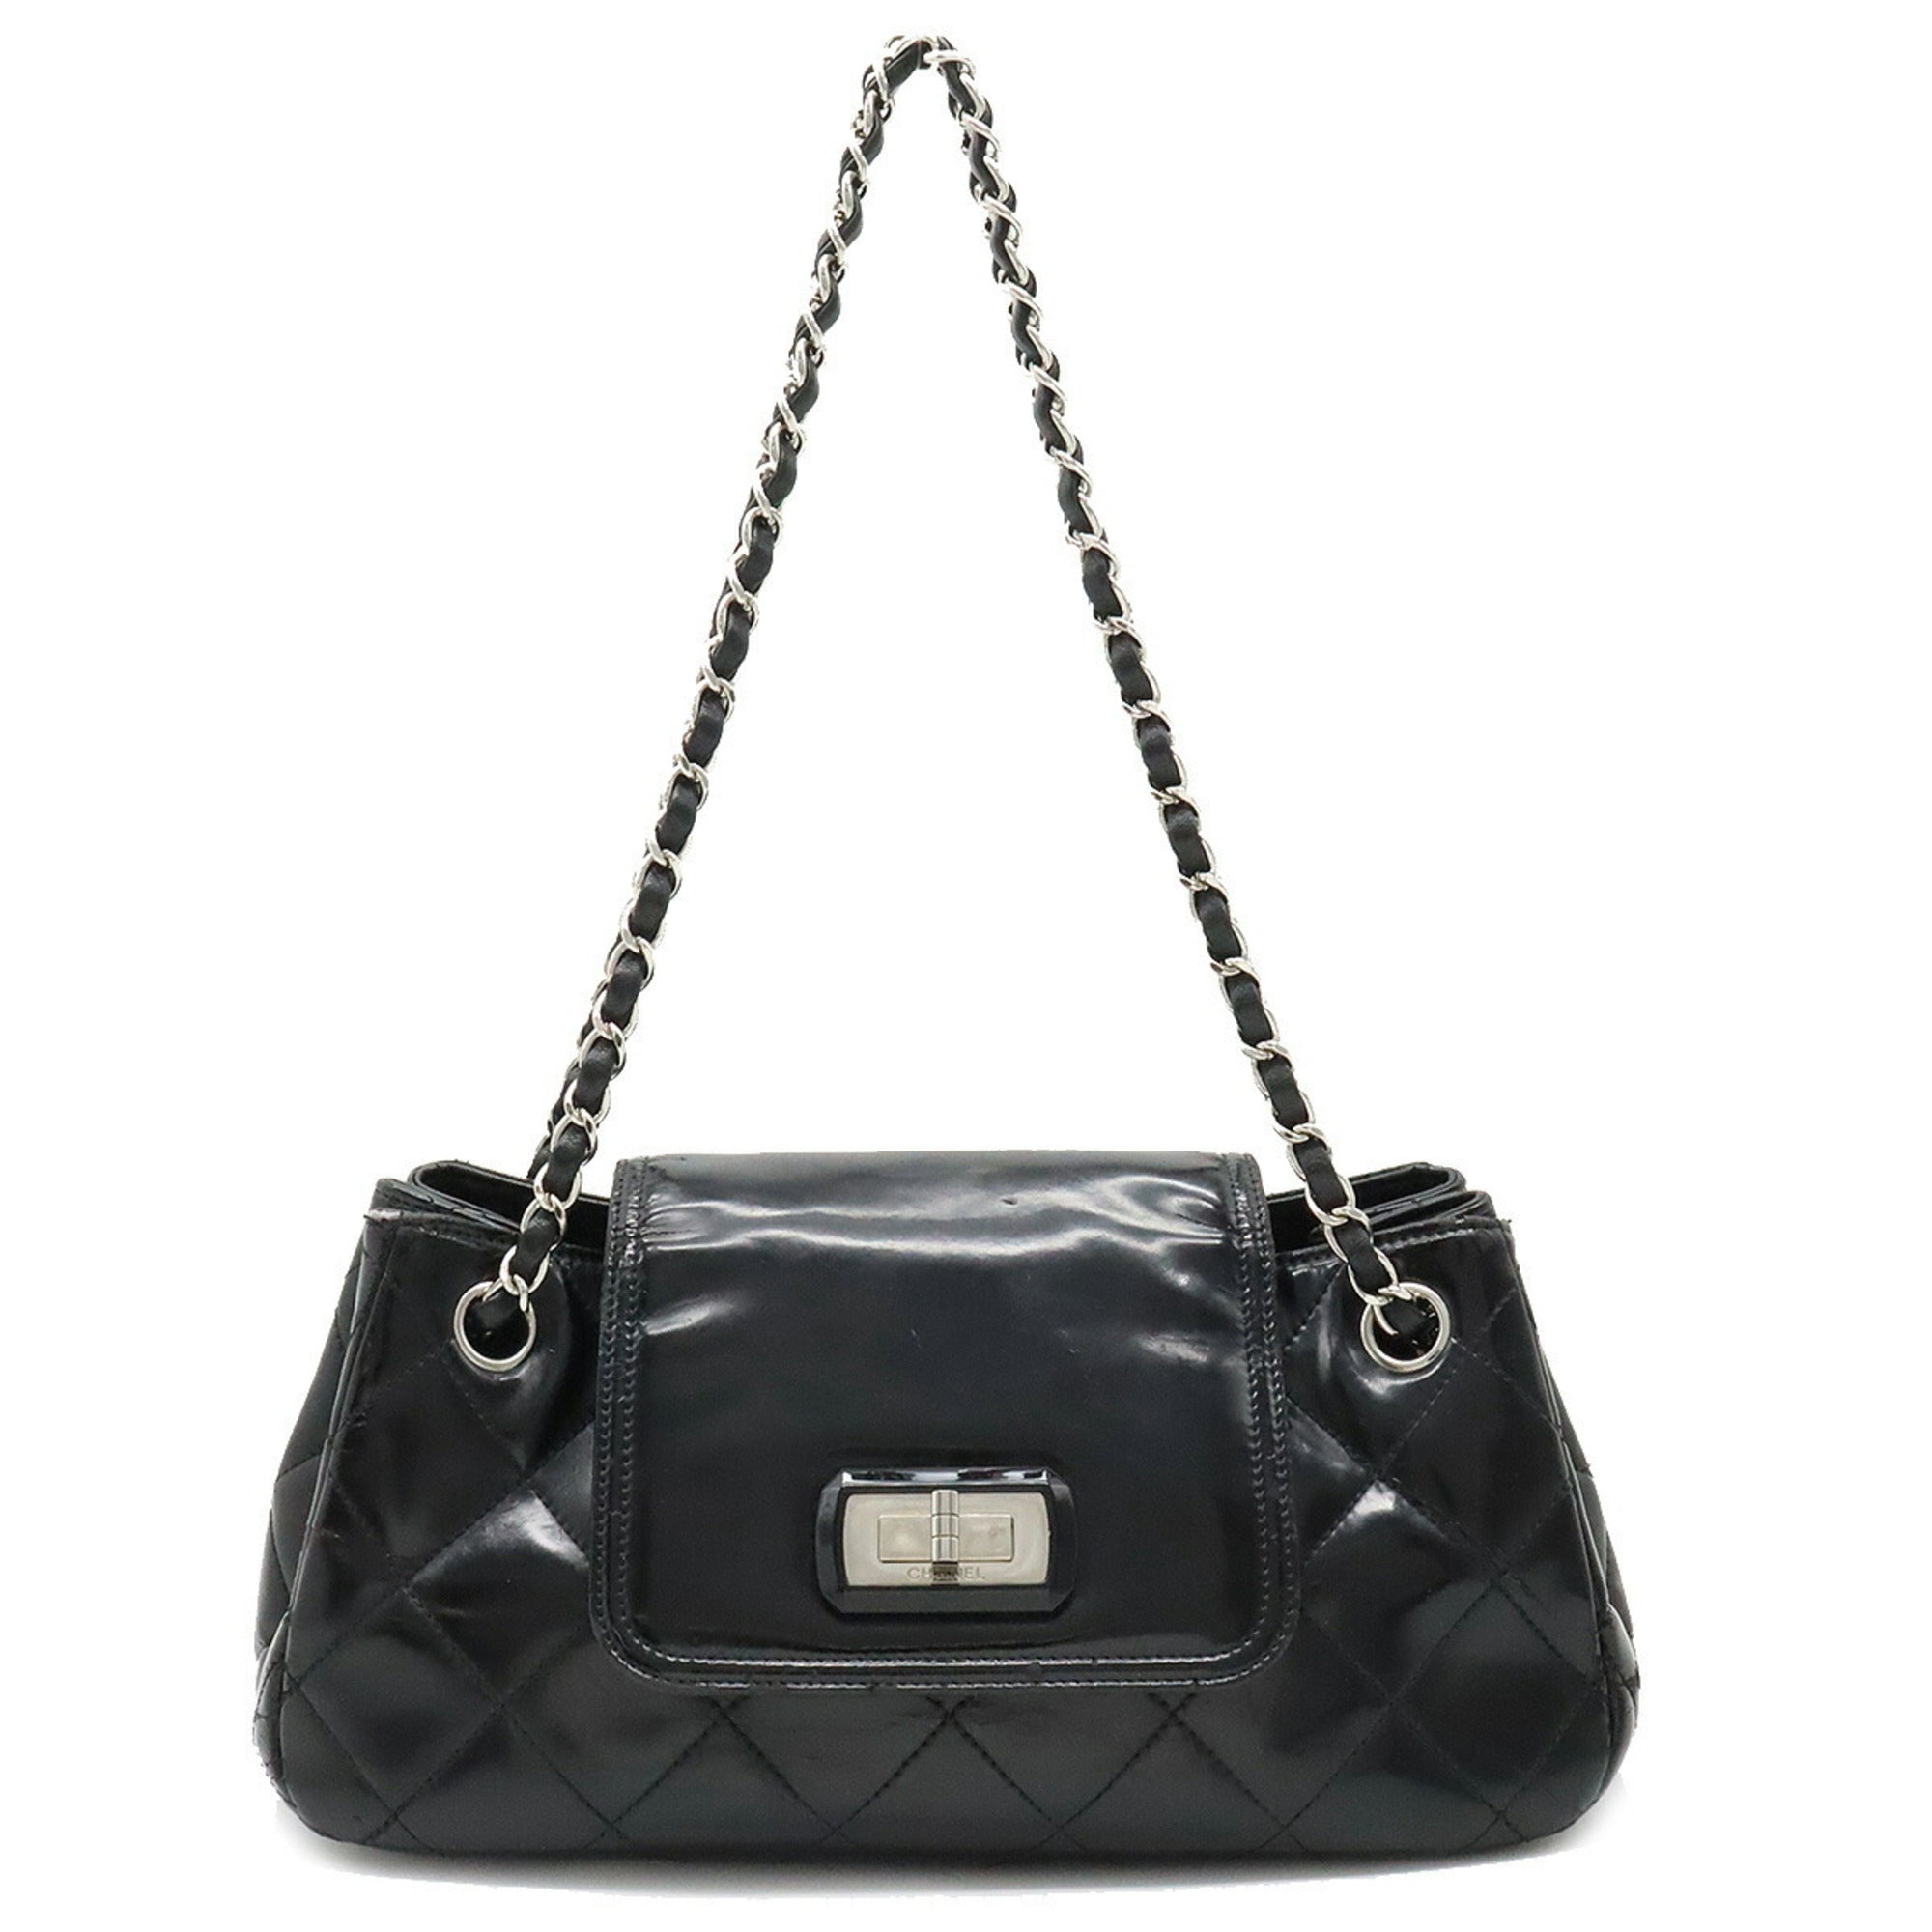 2.55 patent leather mini bag Chanel Black in Patent leather - 35205154